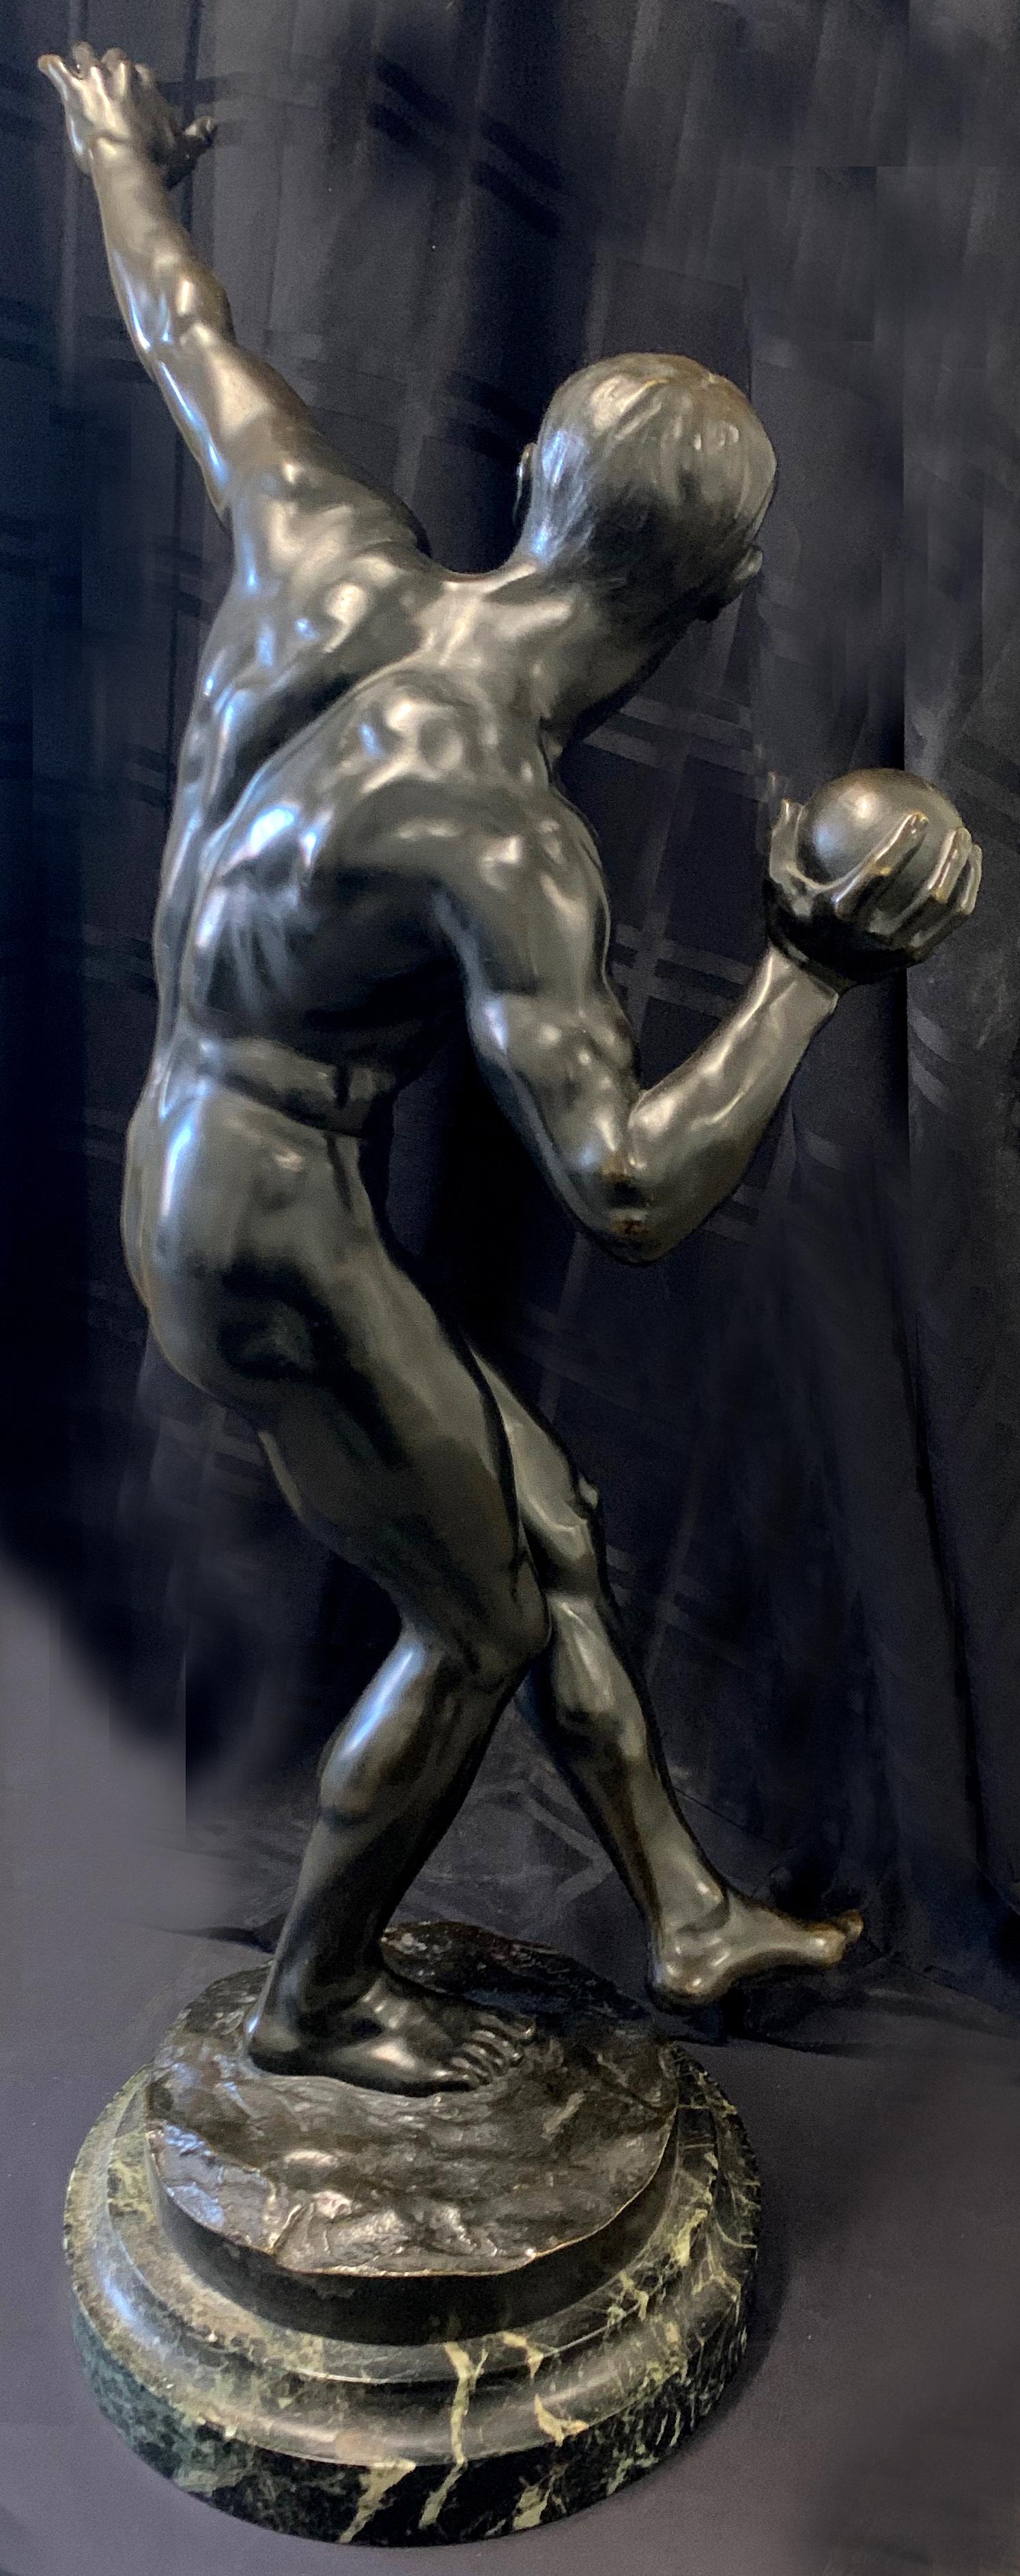 The only example we have ever seen, this large (33 inch high) bronze sculpture of a superbly-conditioned athlete about to put the shot was made by Louis Marie Jules Delapchier in the early 20th century. Unlike discus throwing, which goes back to